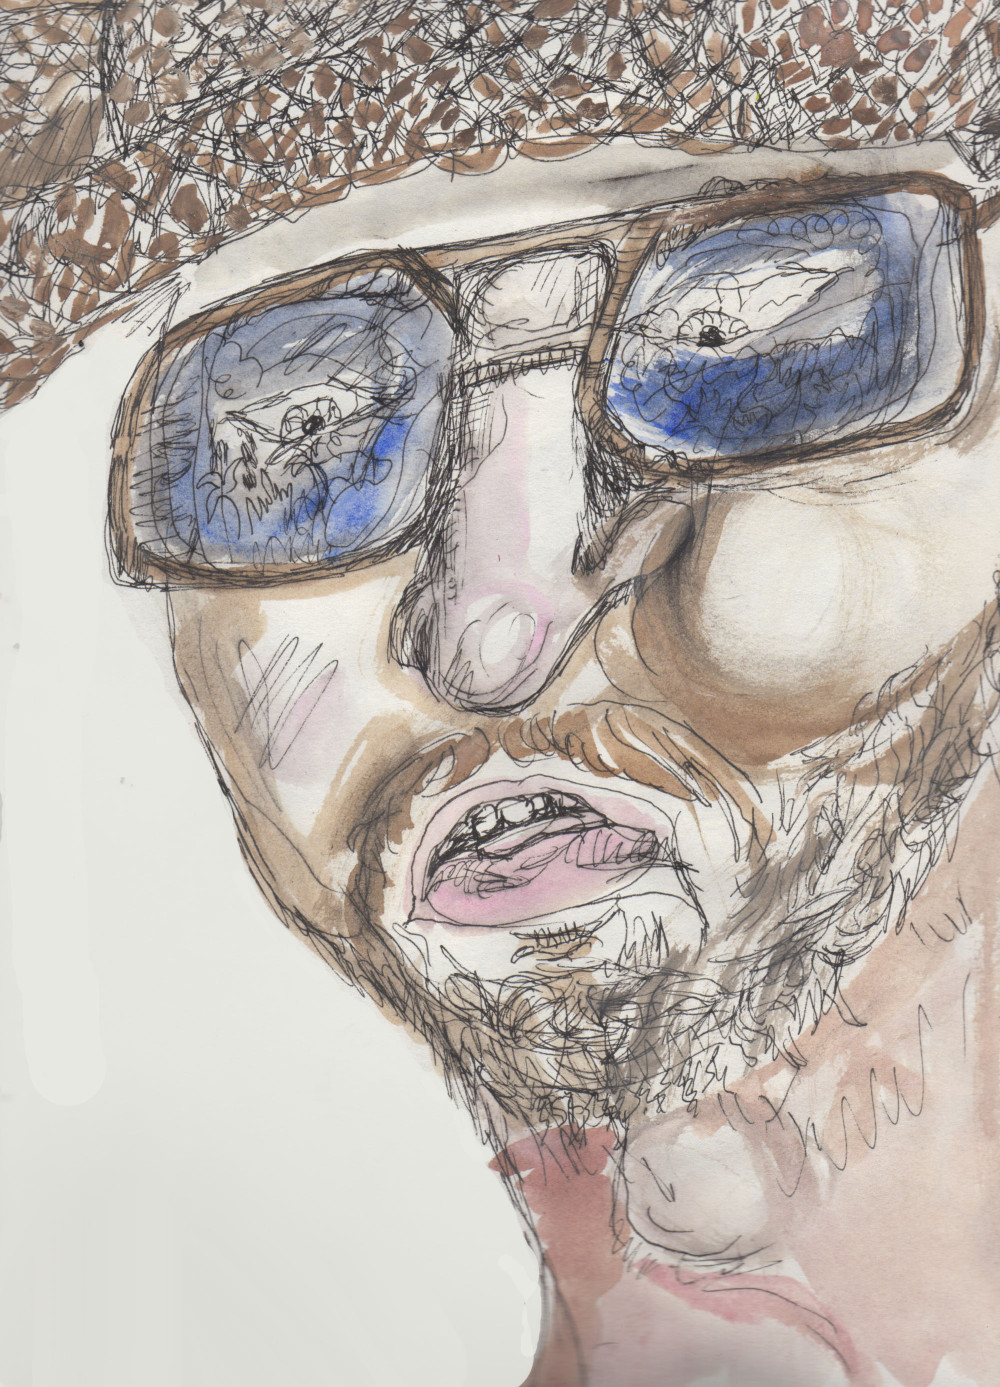 Chris Davis in One-Man Apocalypse Now as sketched by Chuck Schultz.